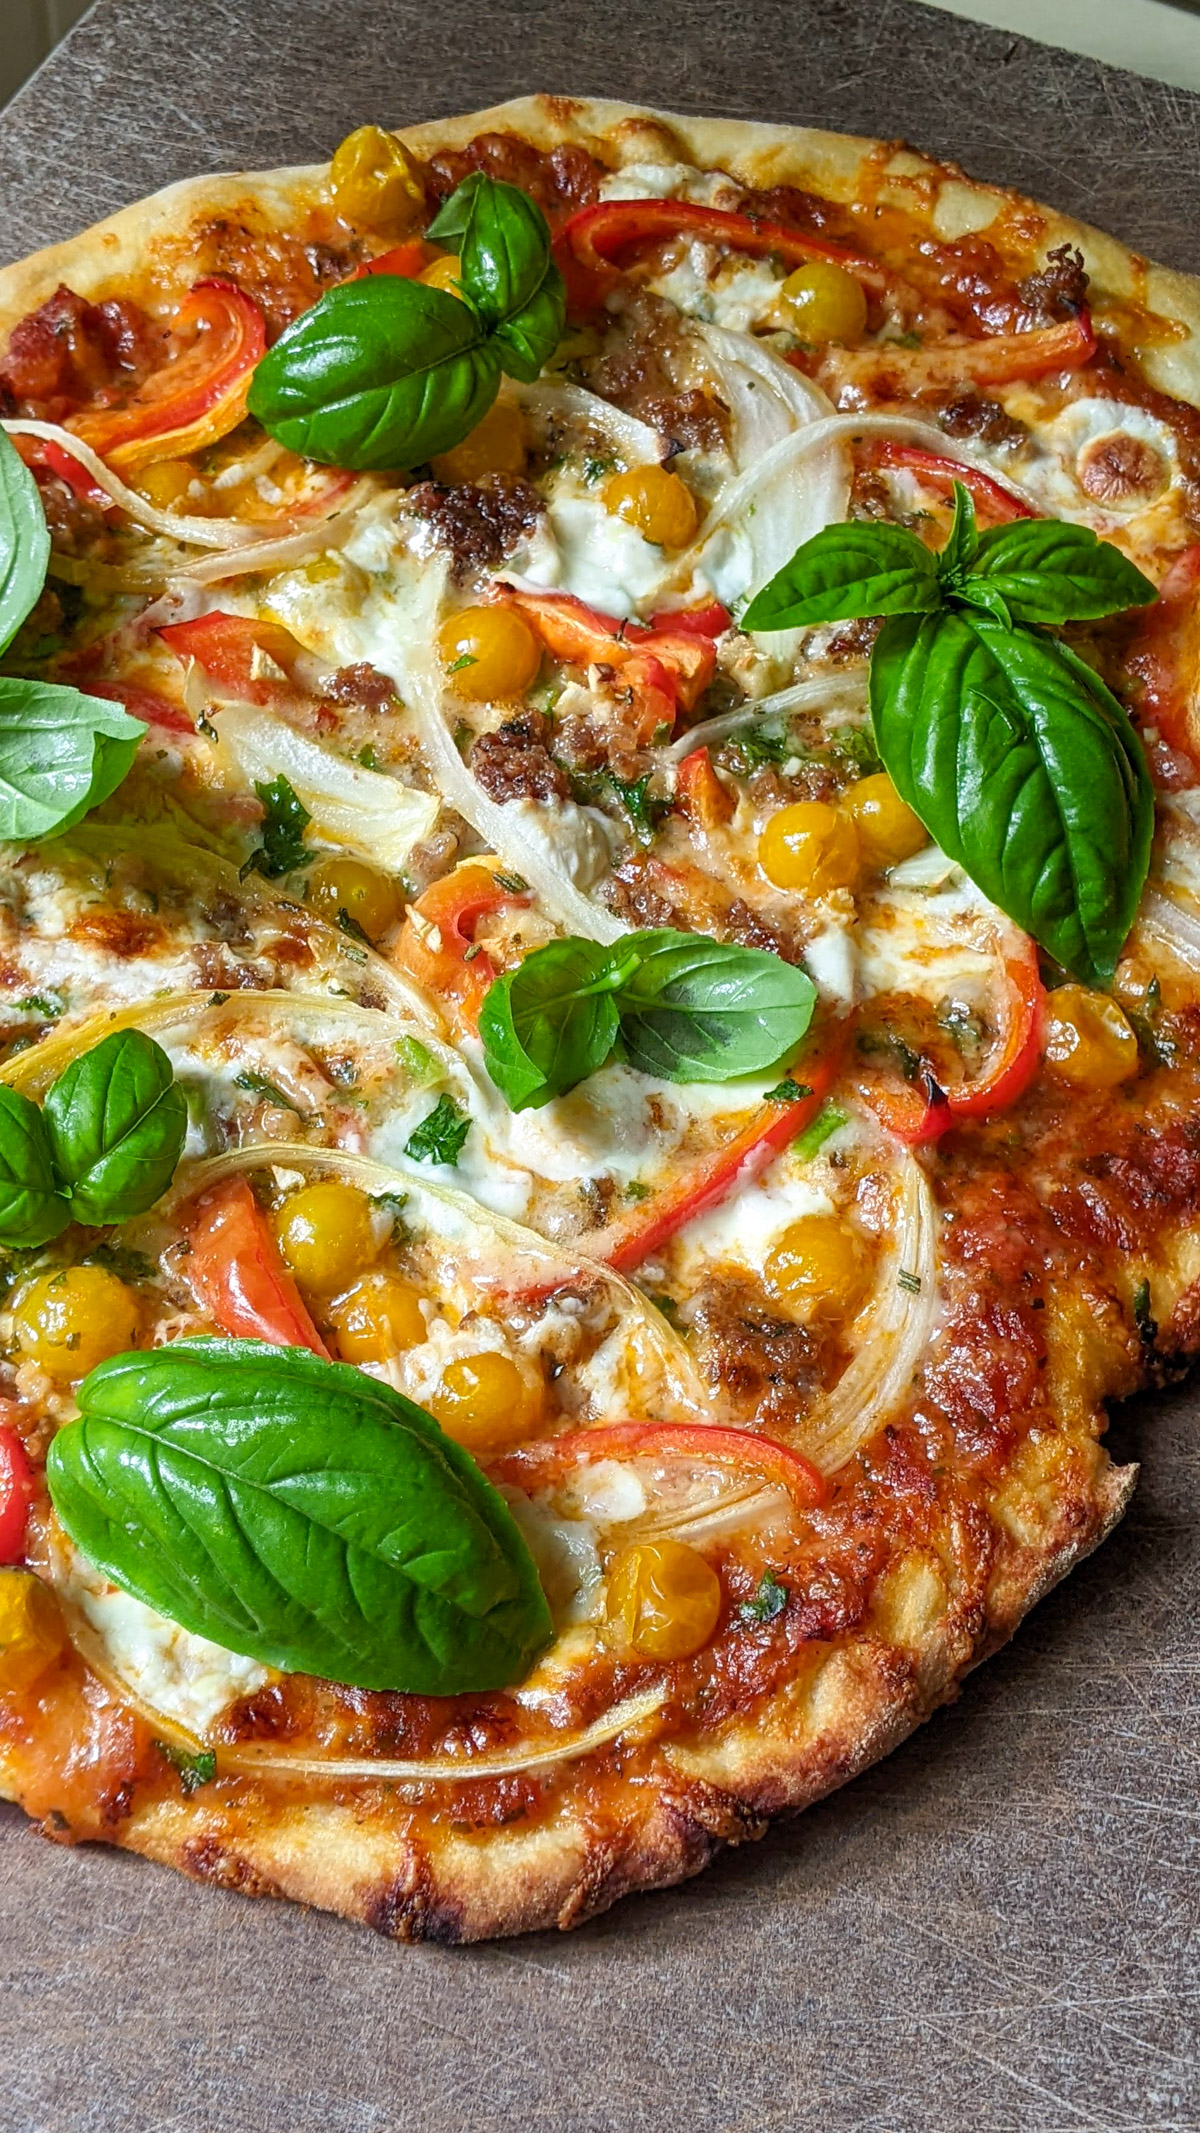 Best Homemade Pizza of Your Life - Cooking is Messy